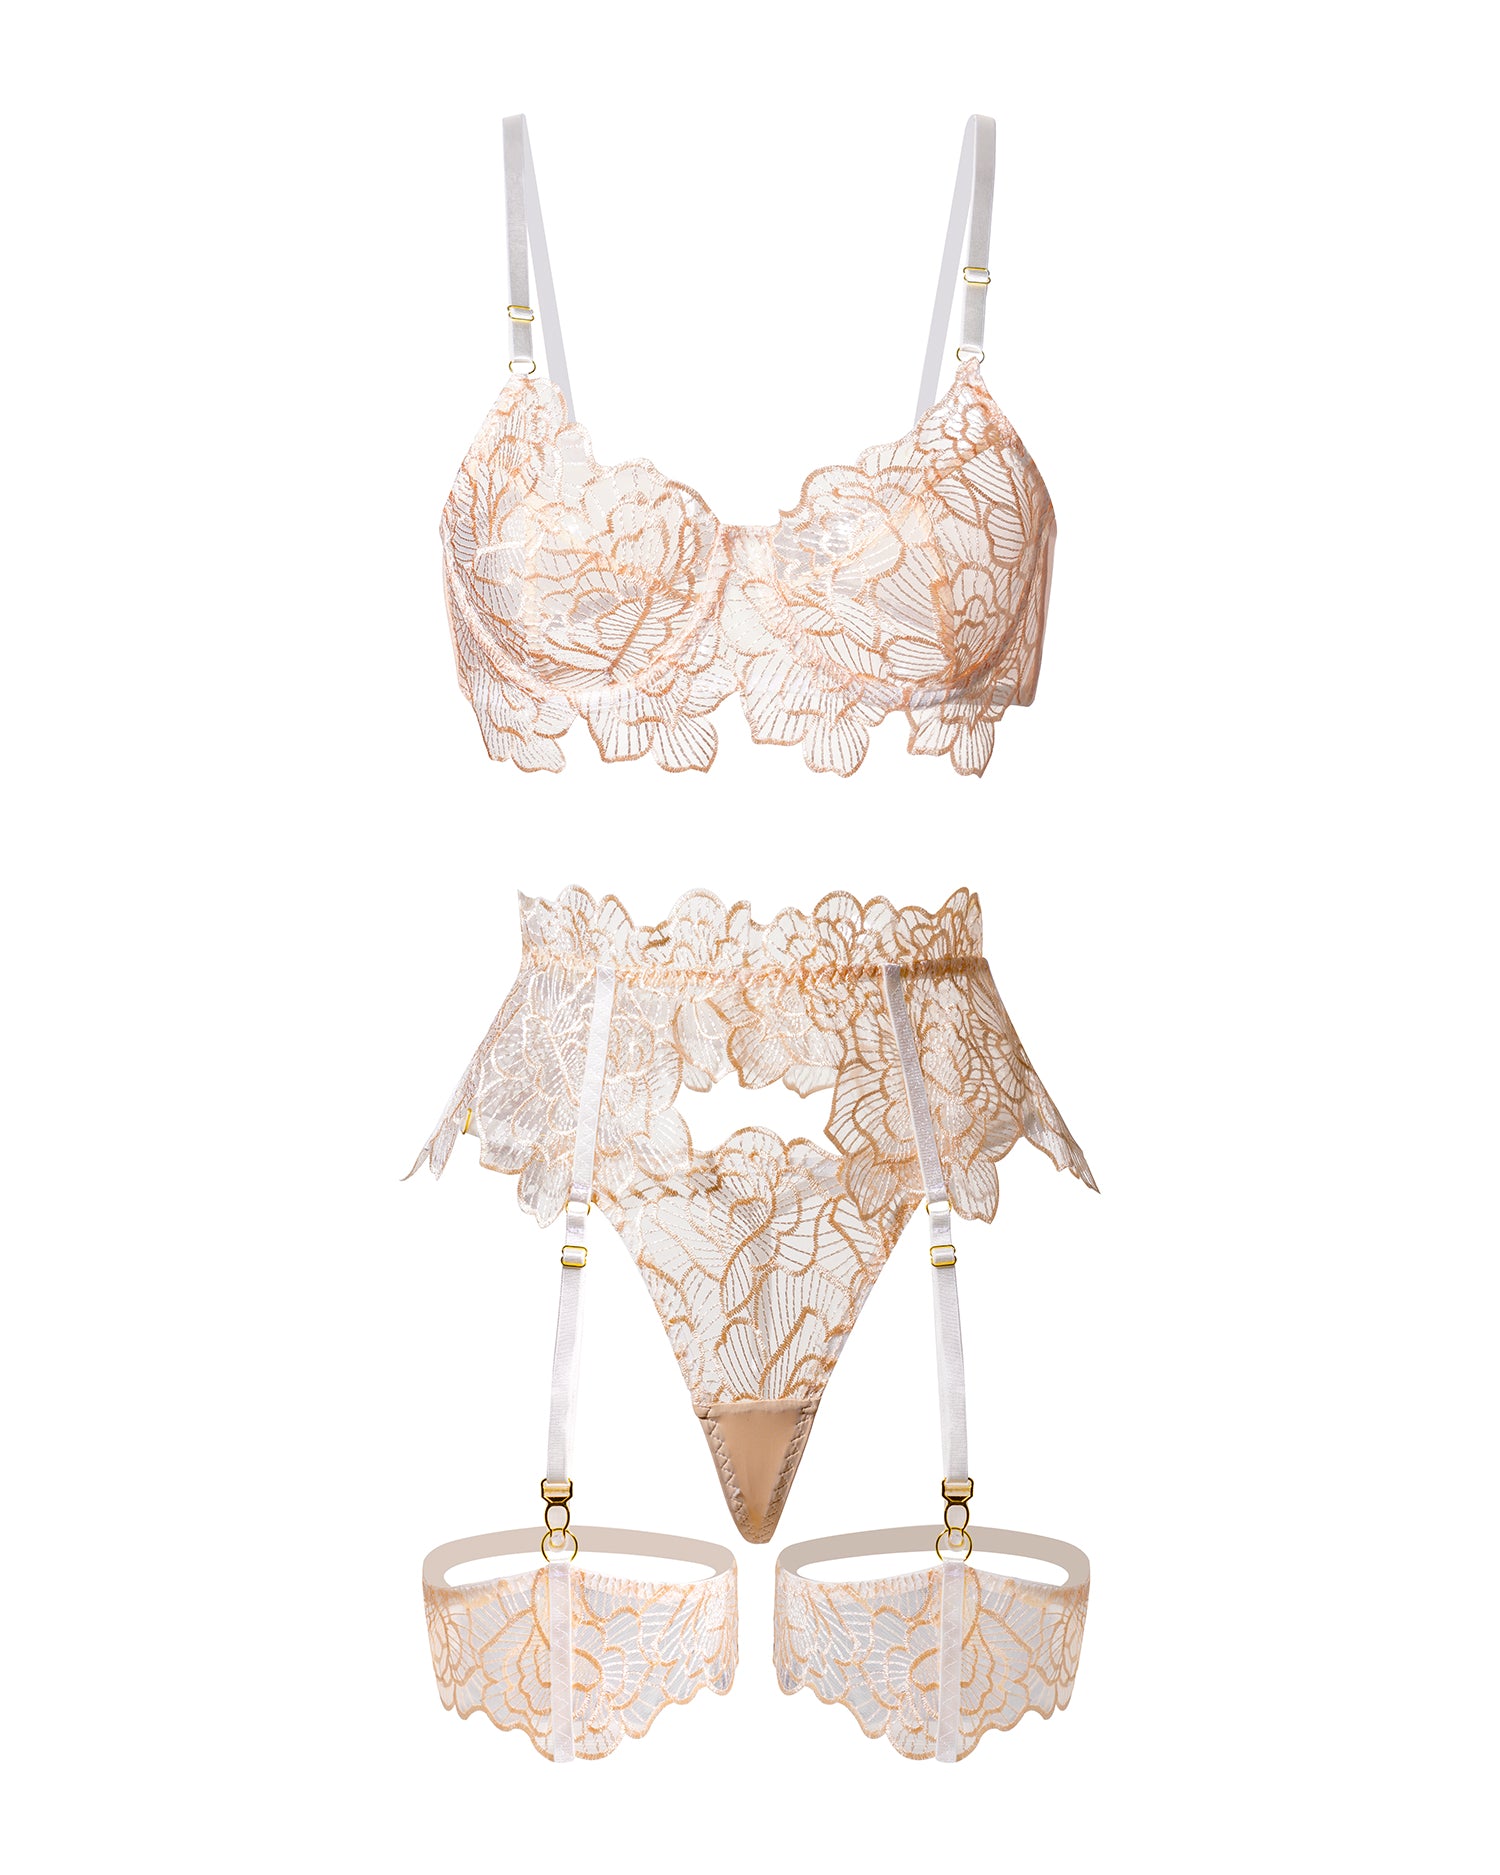 Apricot Lace Flower Embroidery  Lingerie Set| HelloLAGirl